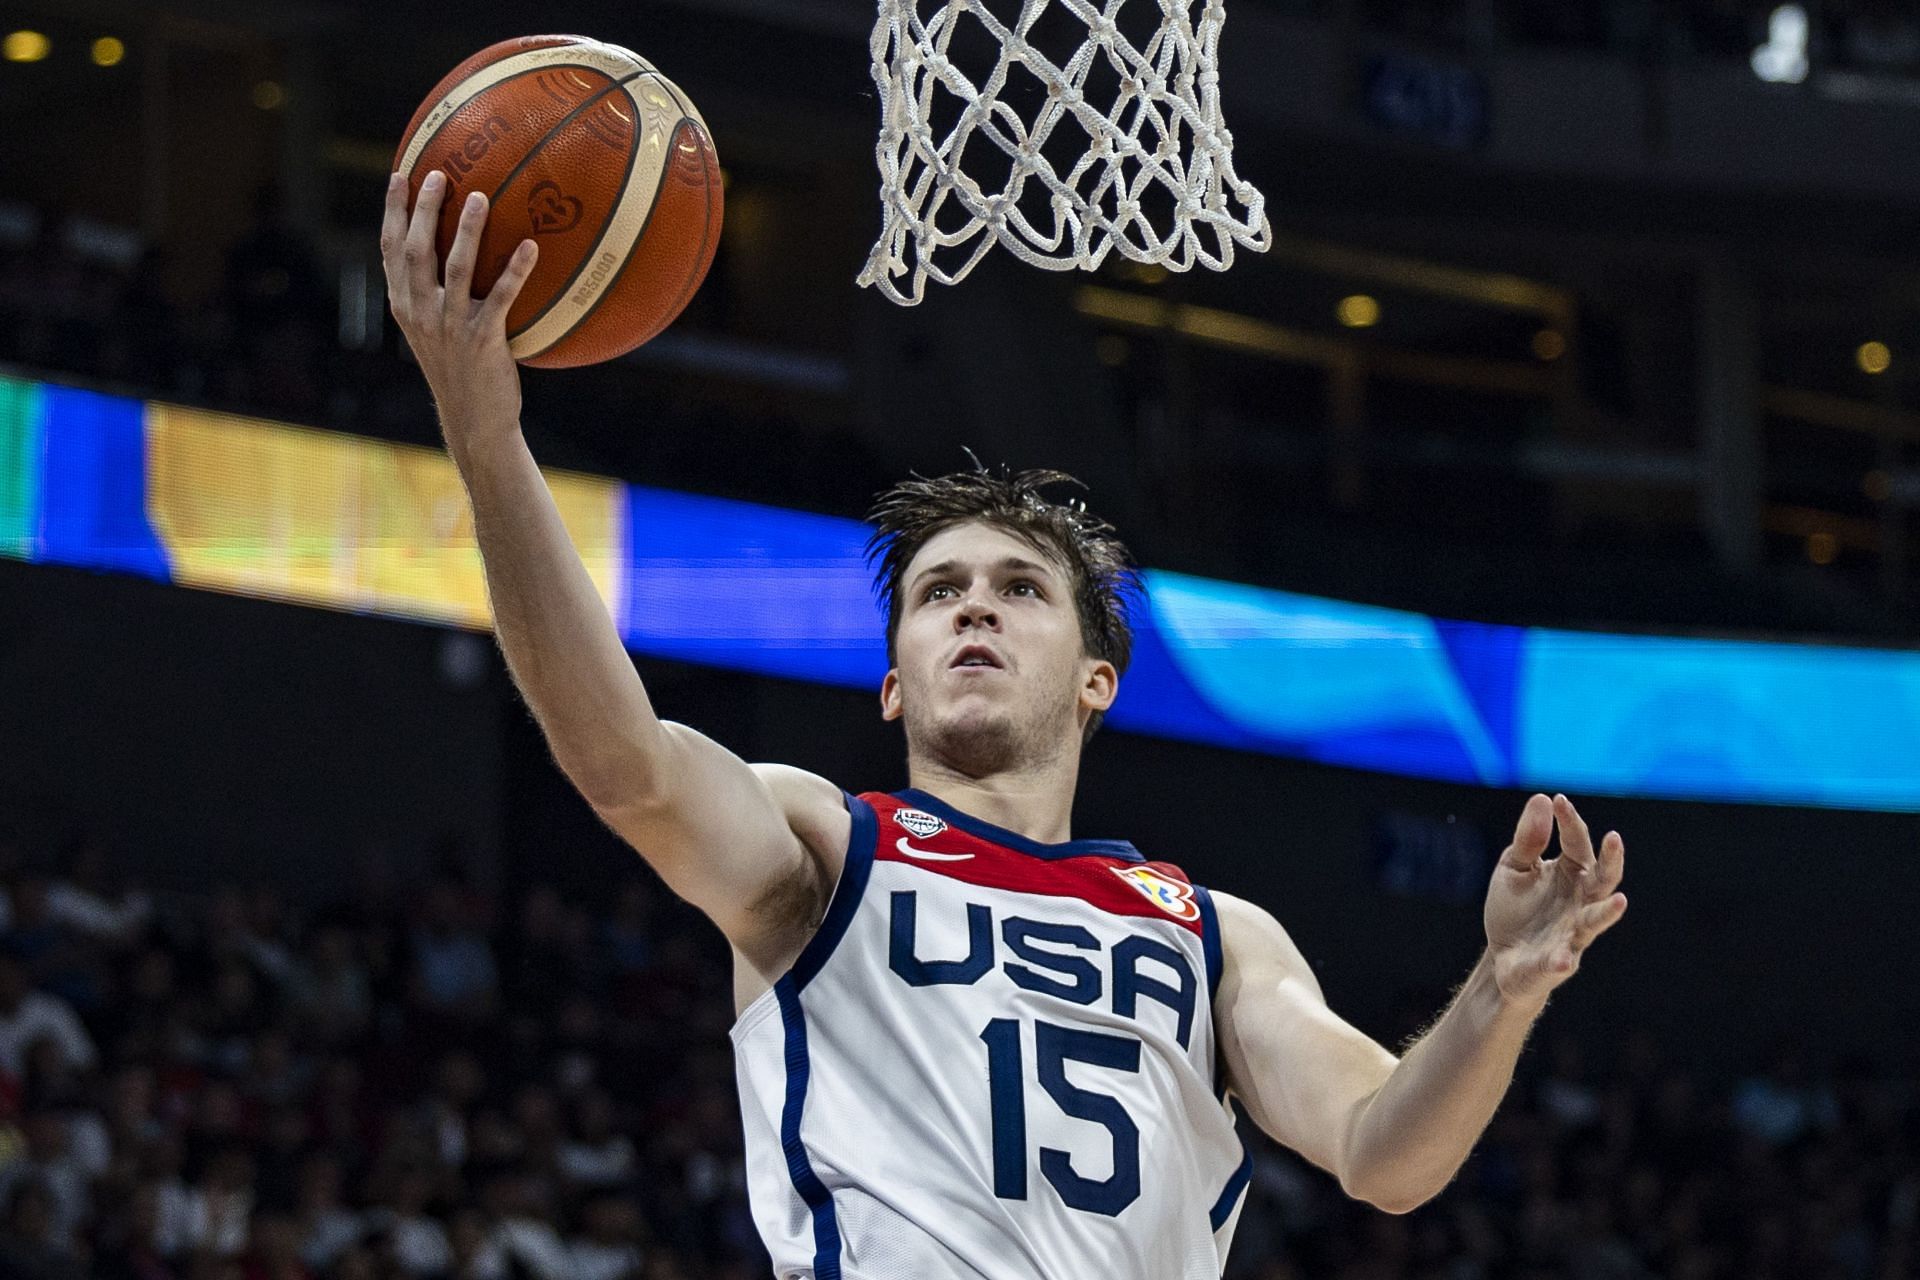 Find out when Austin Reaves will play in the FIBA World Cup with Team USA